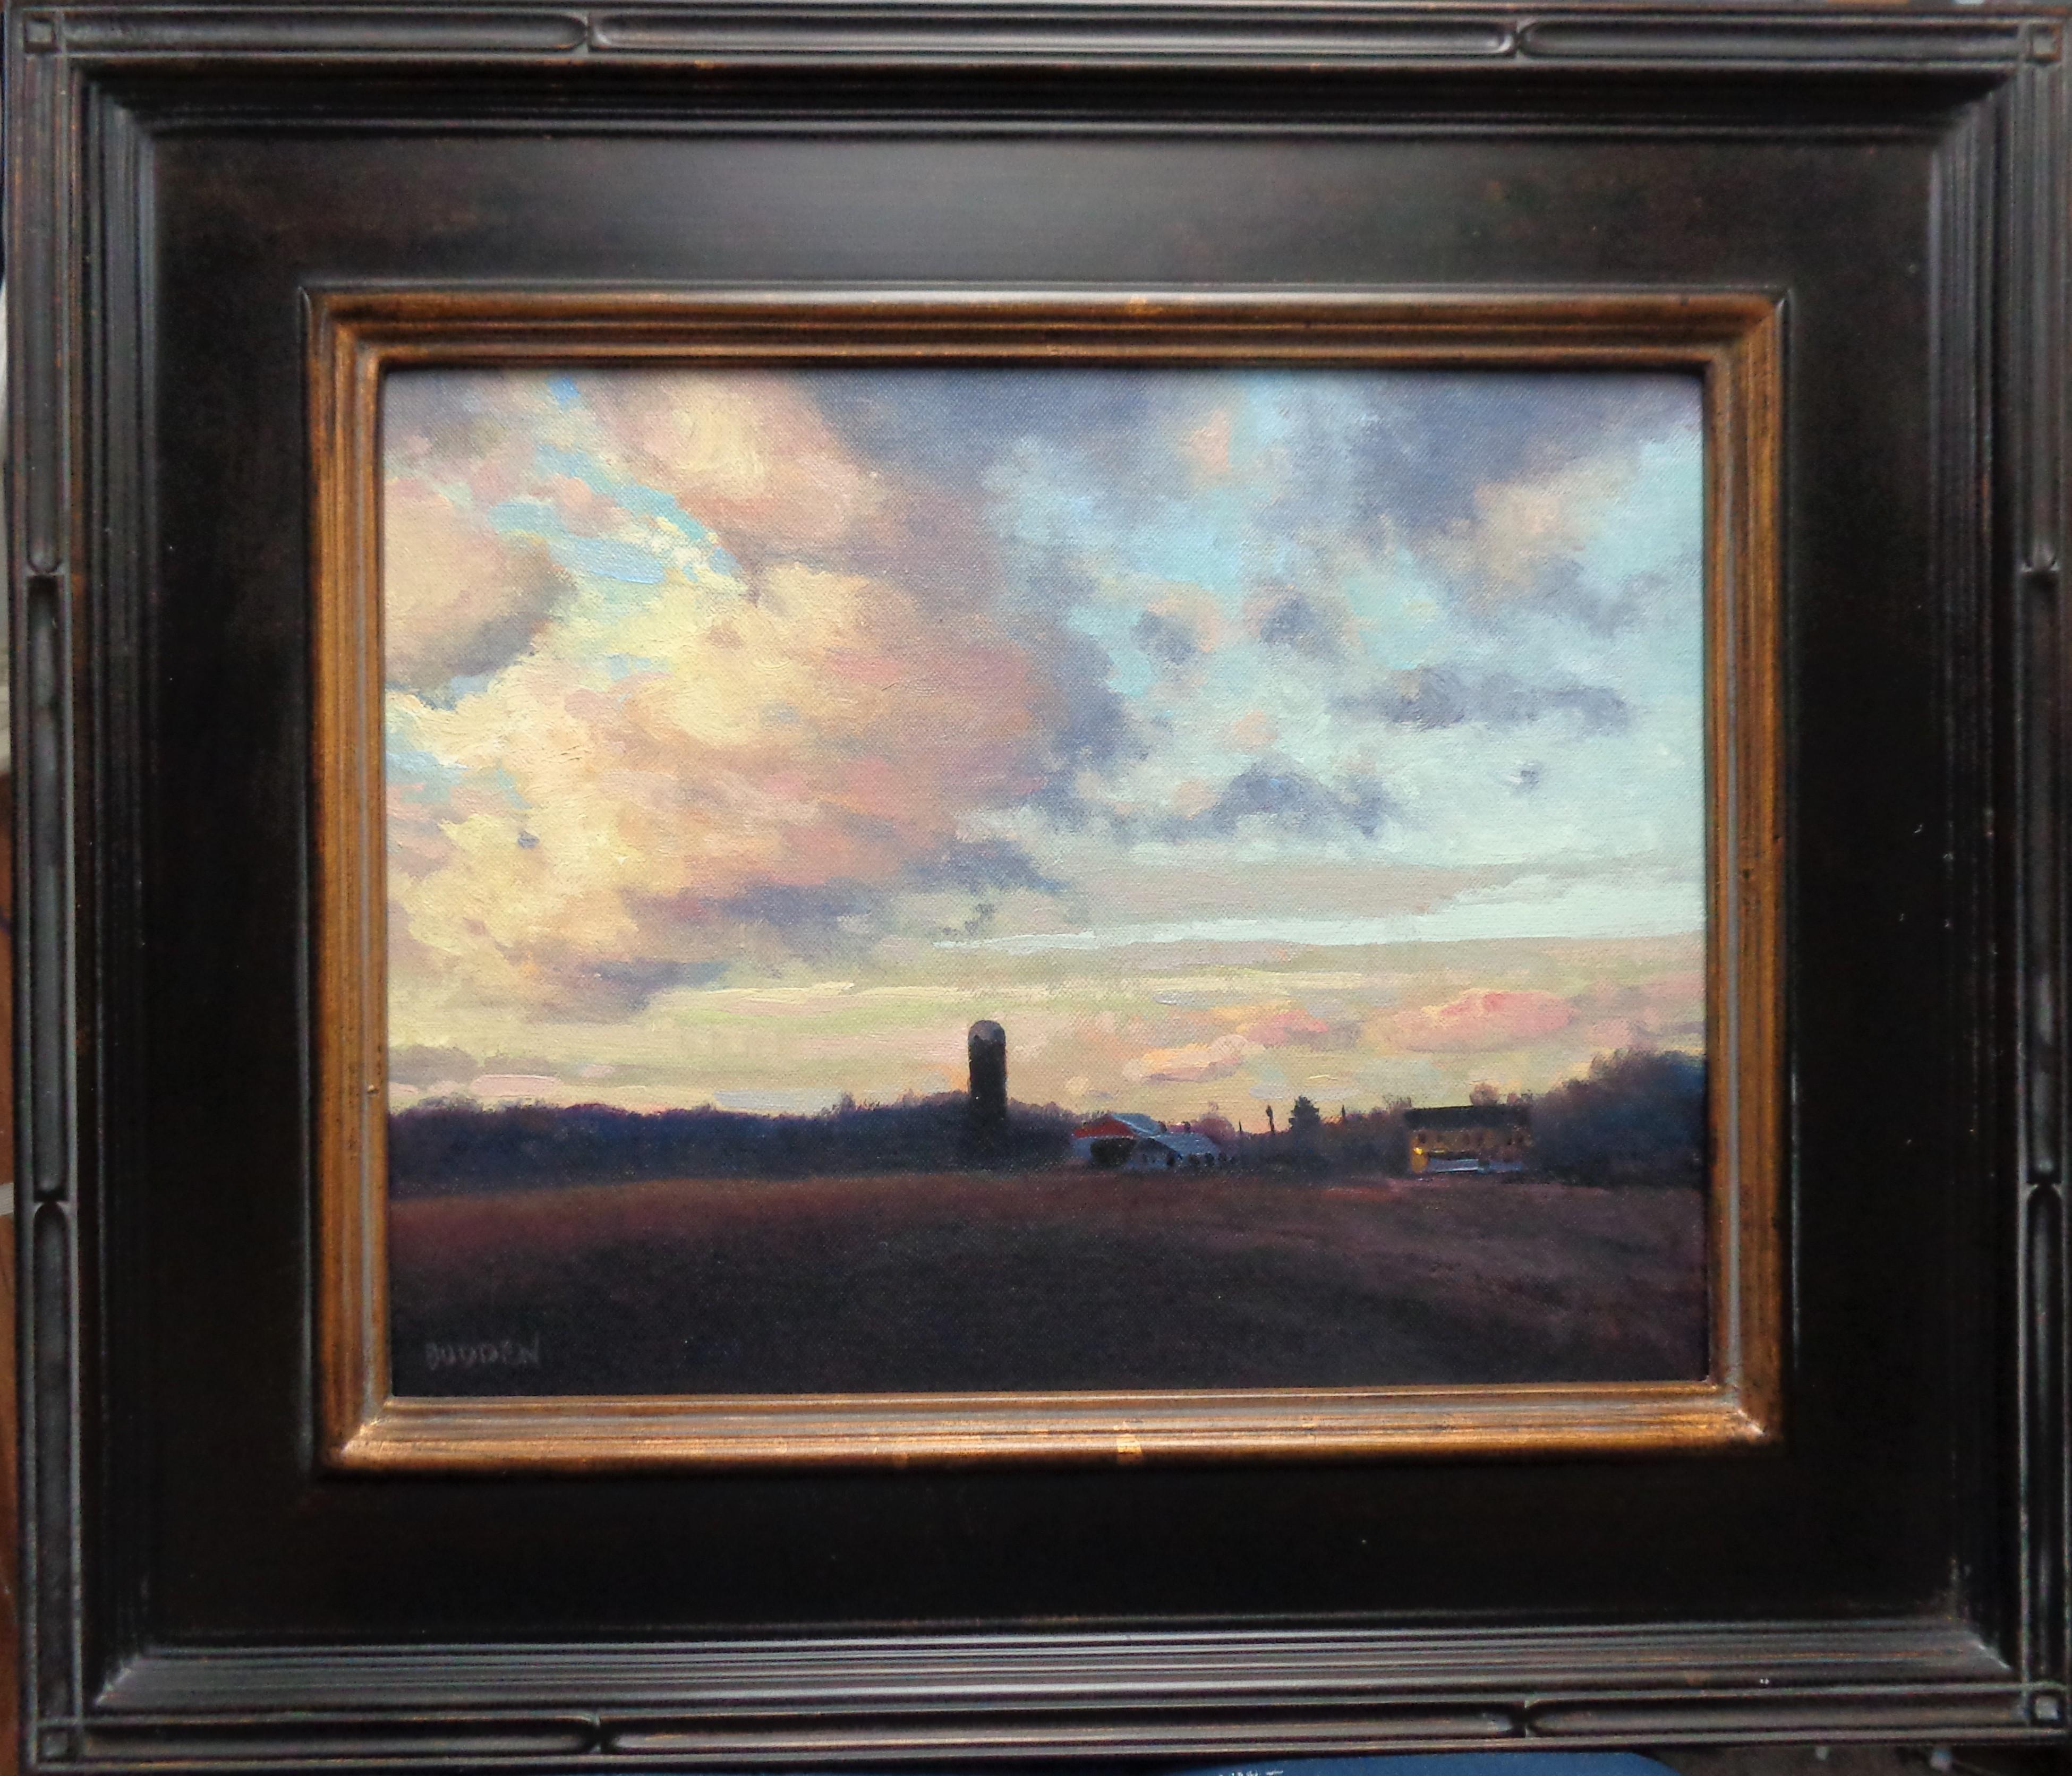 Evening Skies
oil/panel
11 x 14 image size
Evening Skies is an oil on panel painting of a scene near my studio that I love to paint in various seasons and lighting effects. The painting exudes the rich qualities of oil paint with bright strong